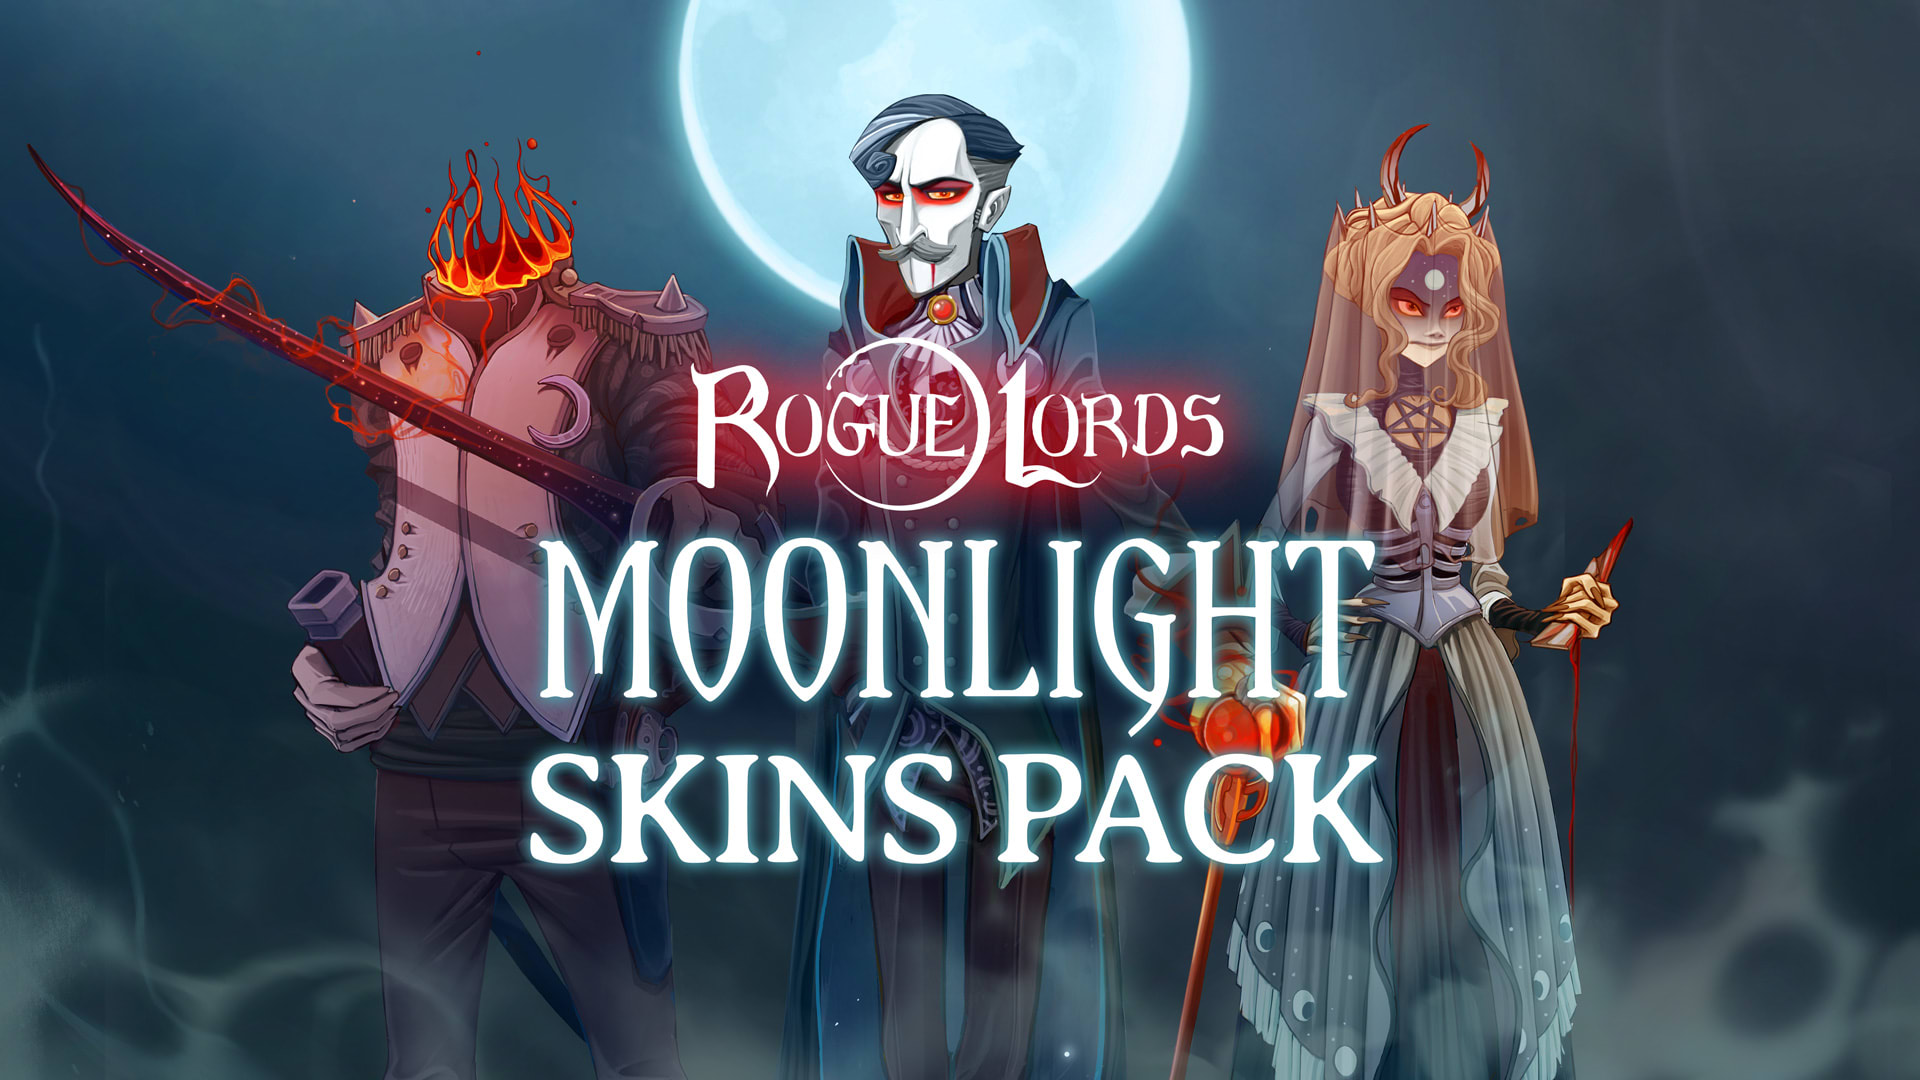 Rogue Lords - Moonlight Skin Pack